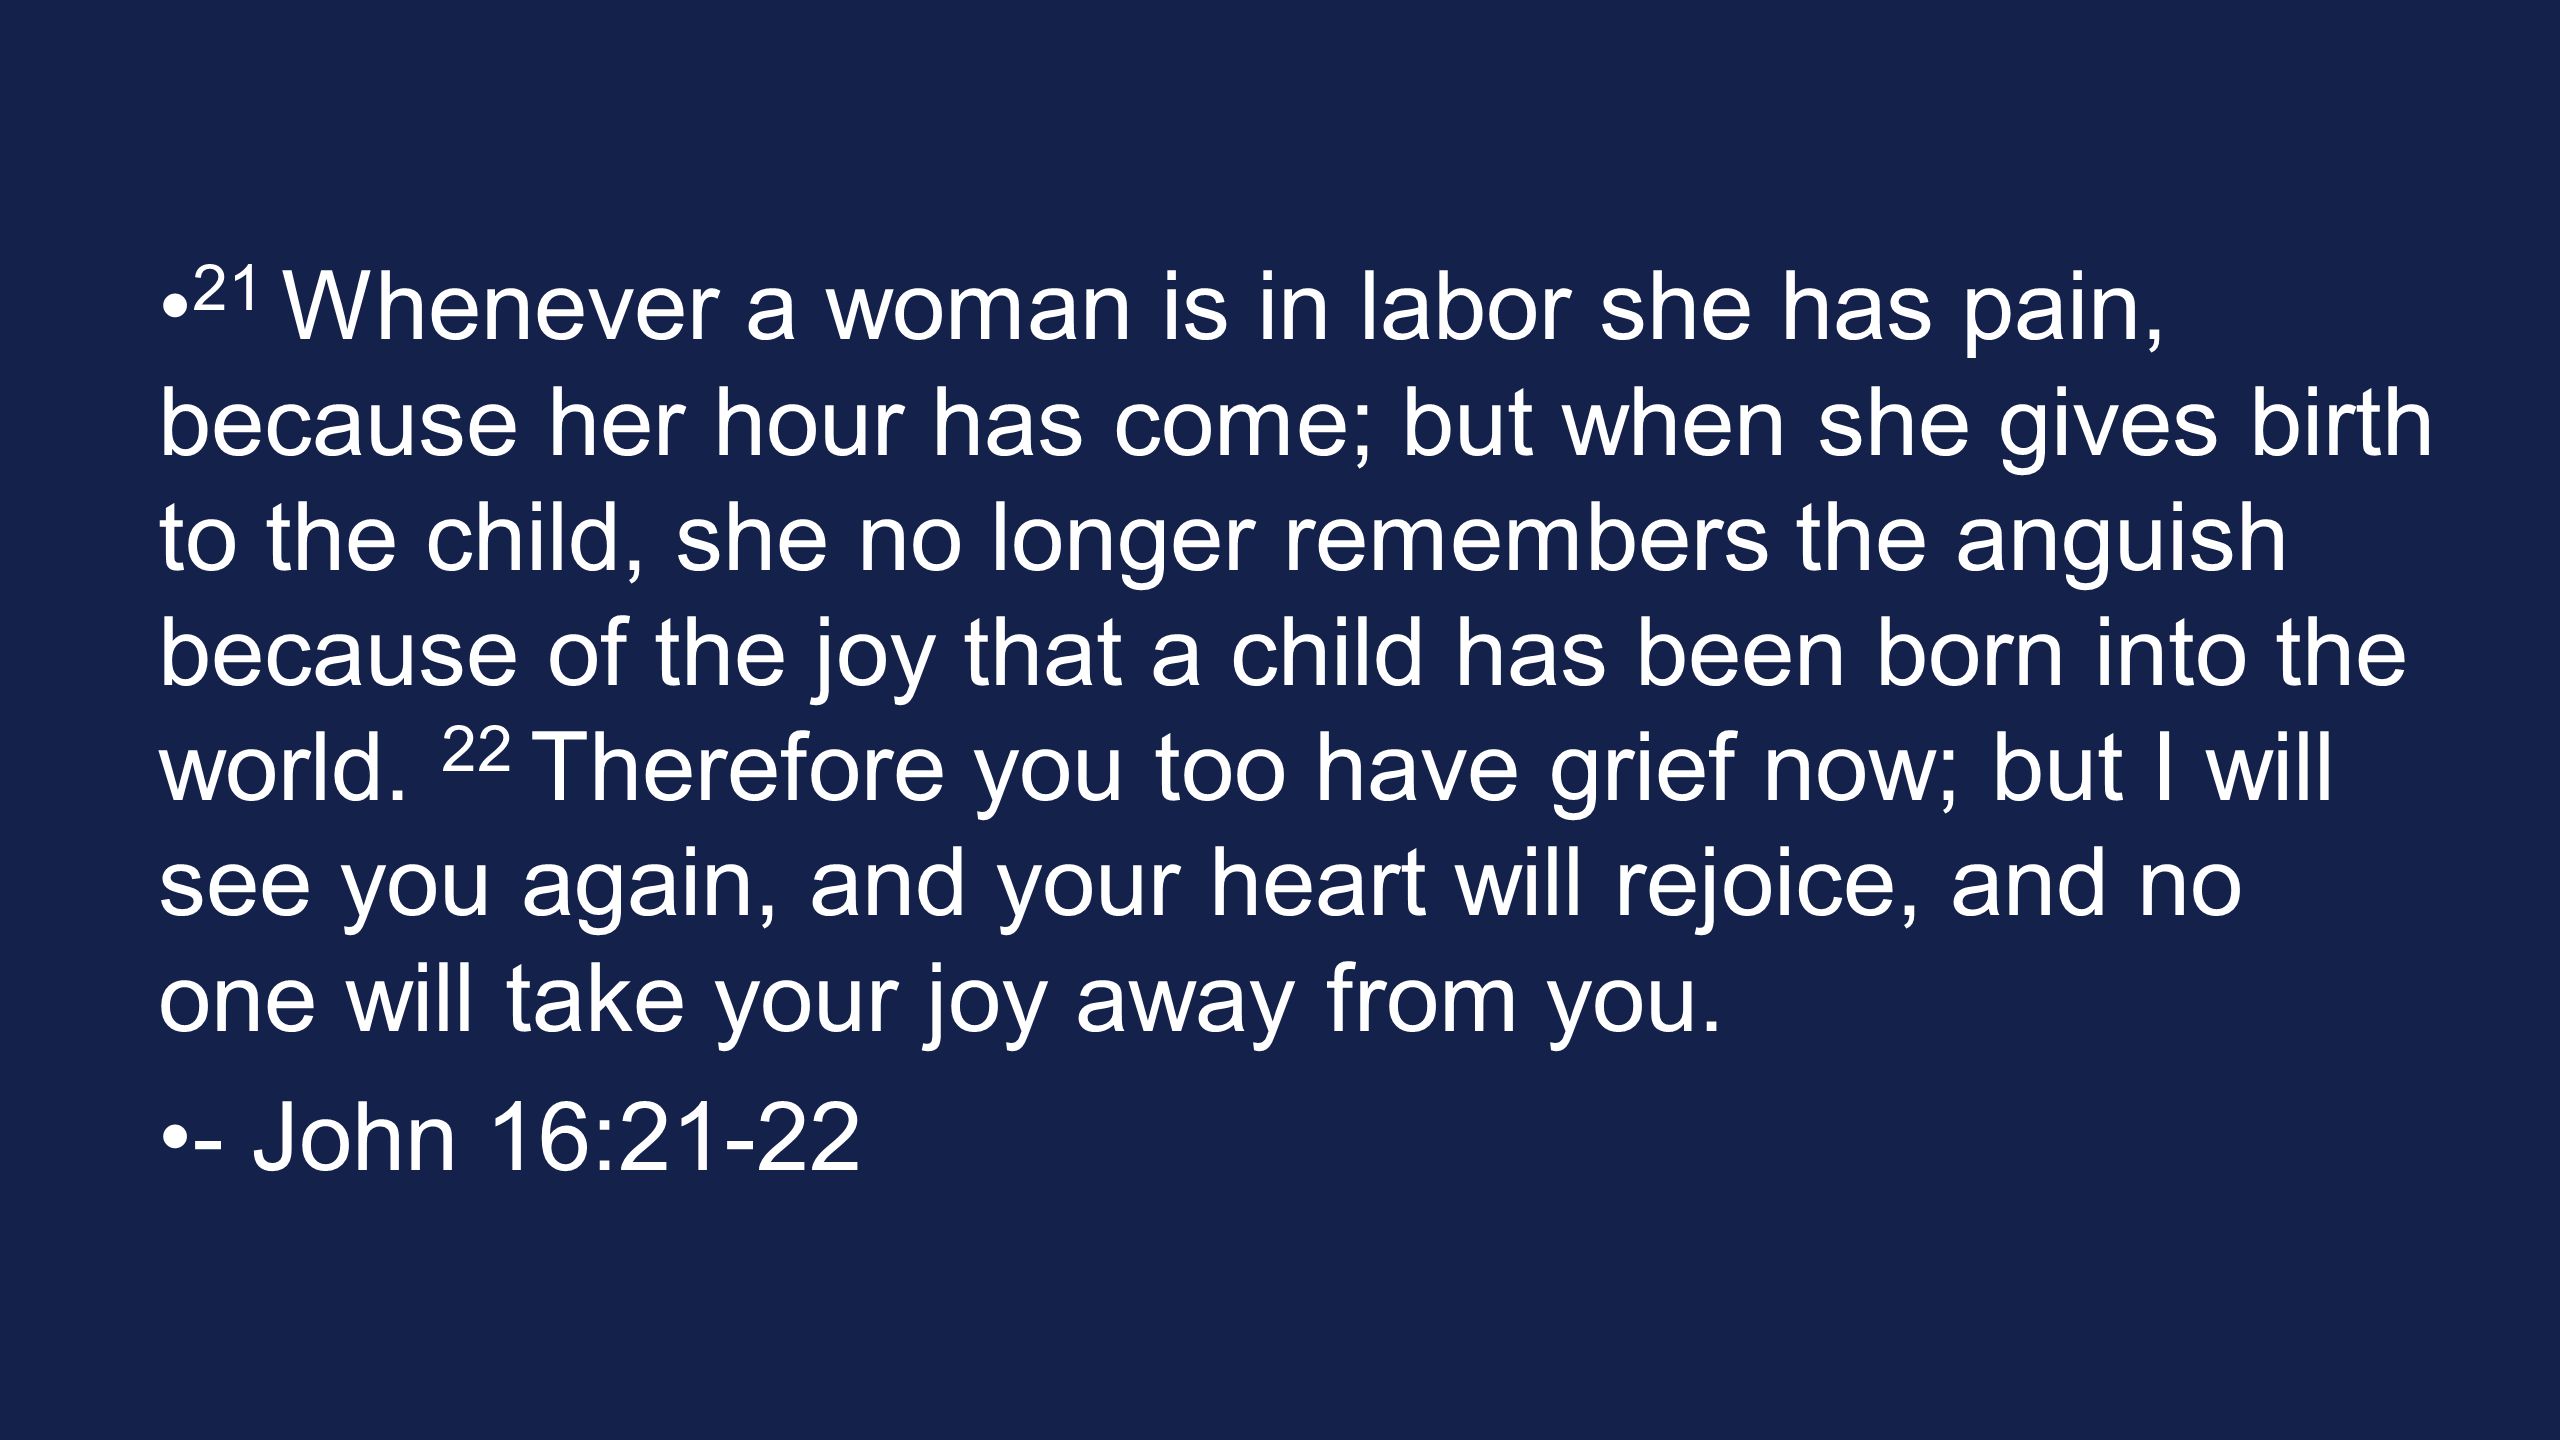 21 Whenever a woman is in labor she has pain, because her hour has come; but when she gives birth to the child, she no longer remembers the anguish because of the joy that a child has been born into the world.